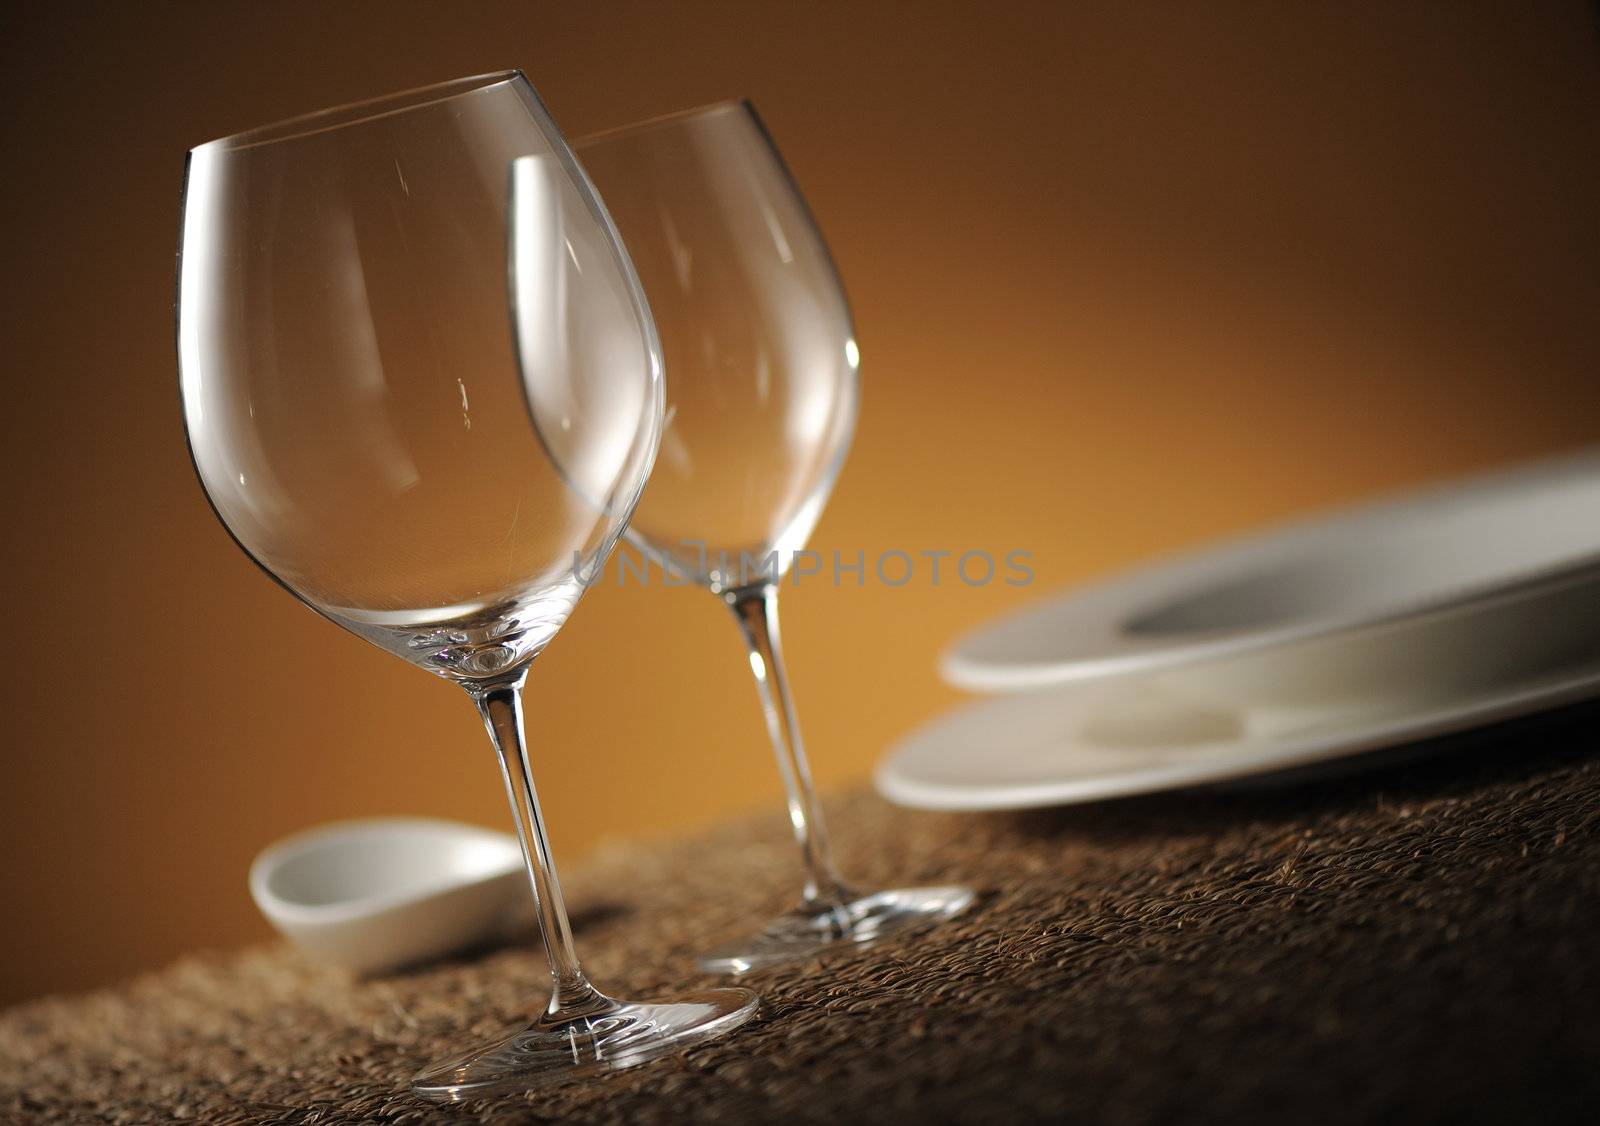 Dinner place setting with plates, glasses and cutlery shallow dof 